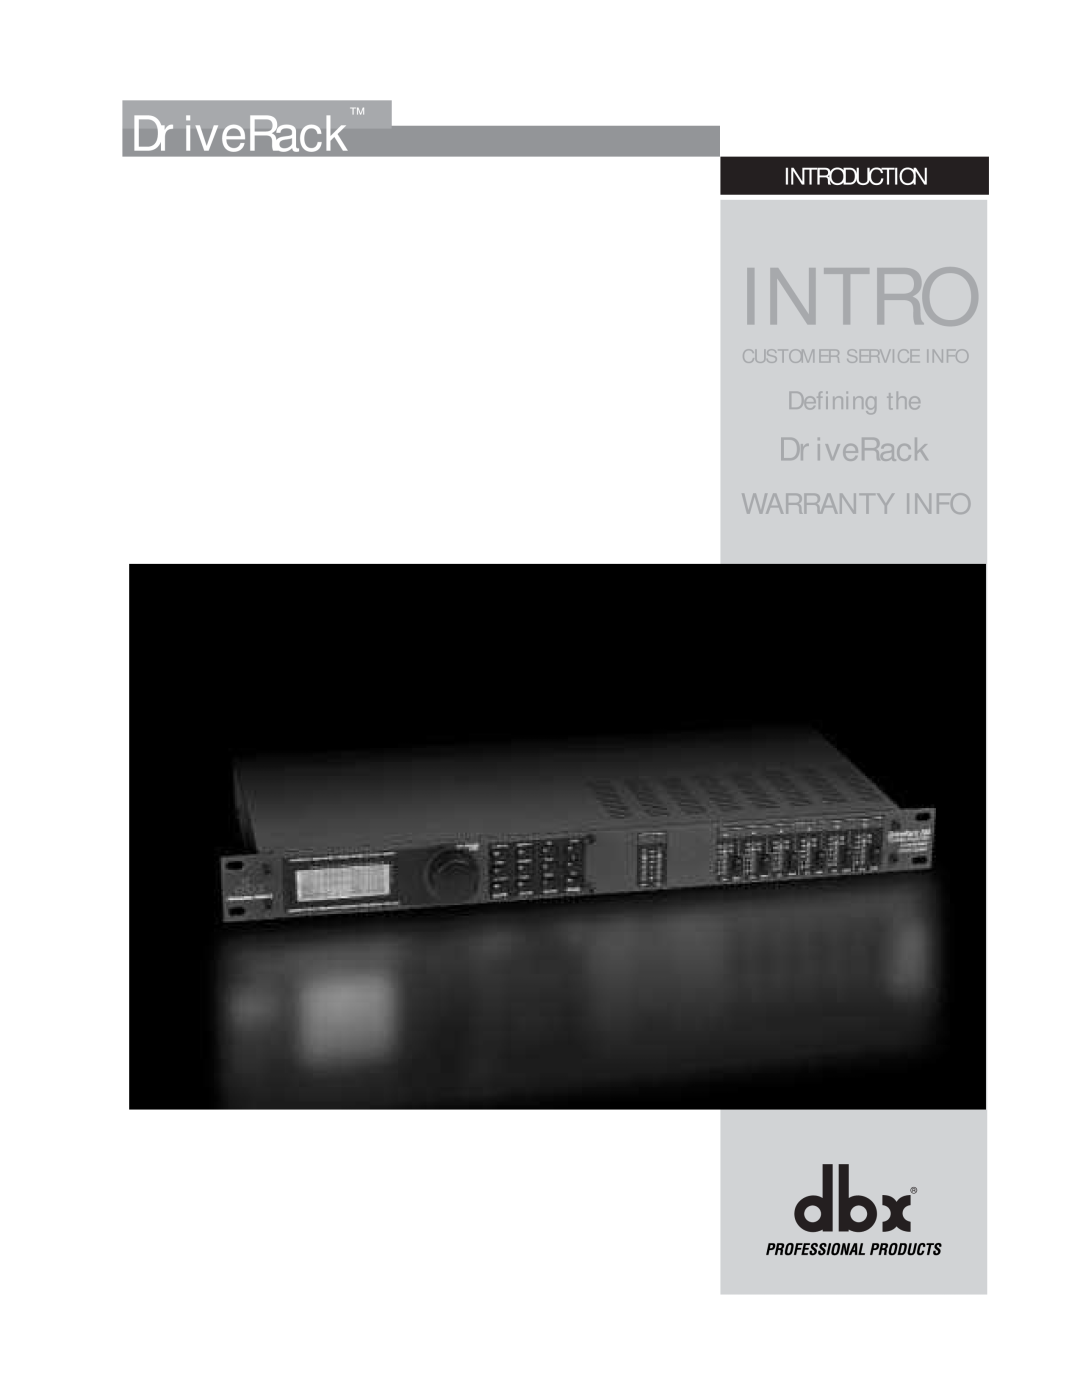 dbx Pro 260 user manual DriveRack, Warranty Info, Introduction, Defining the, Customer Service Info 